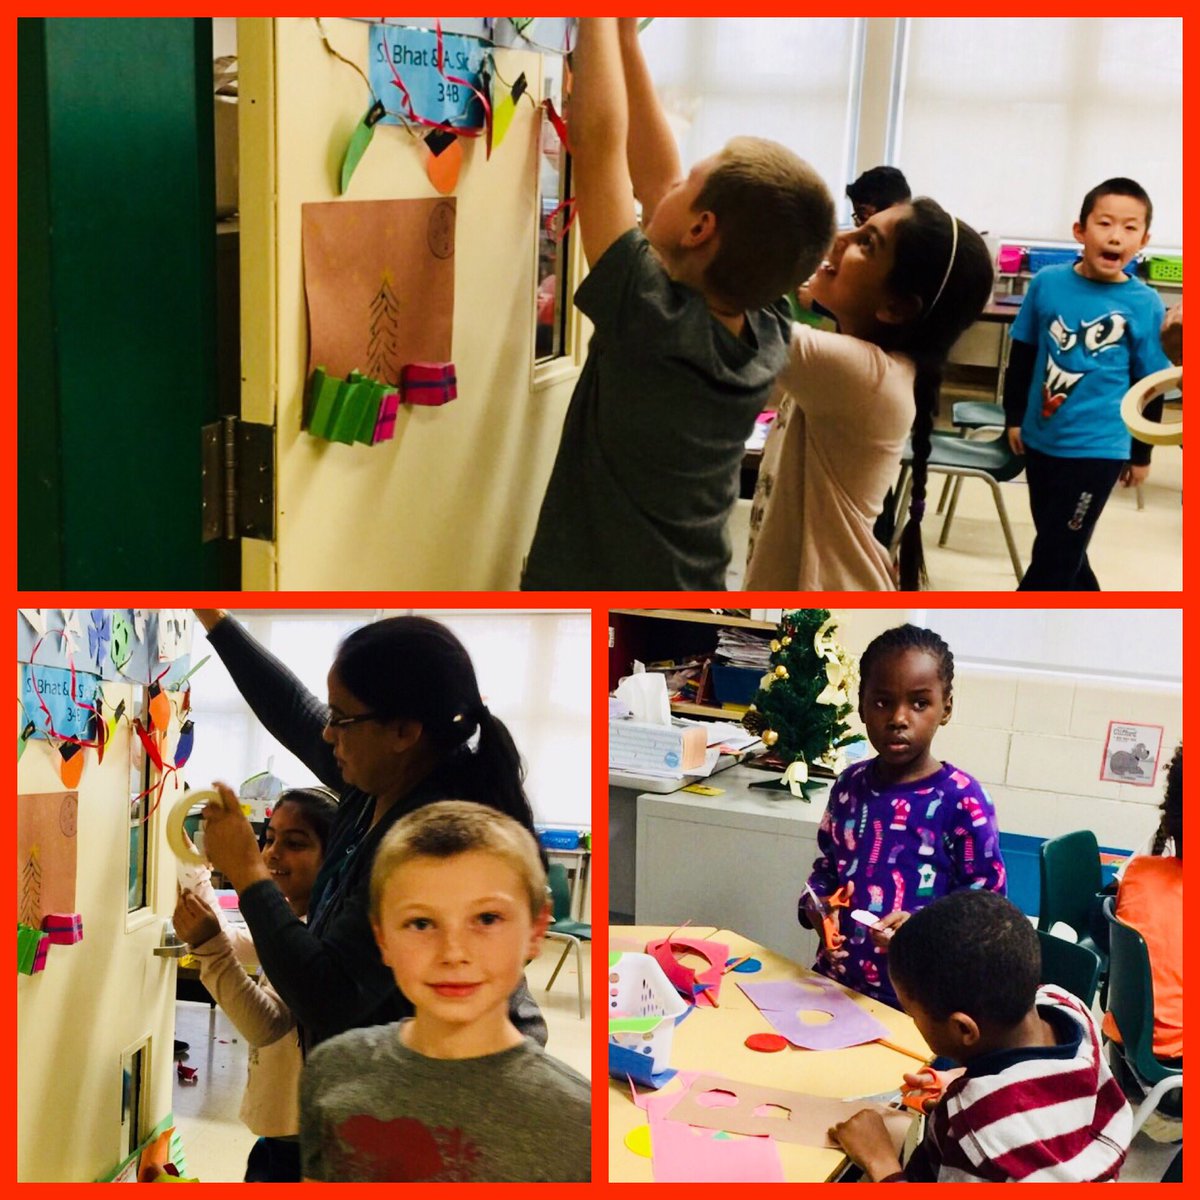 Students @Agnesbears in full spirit as they compete for the best decorated door! @ClimatePeel #holidaycheer